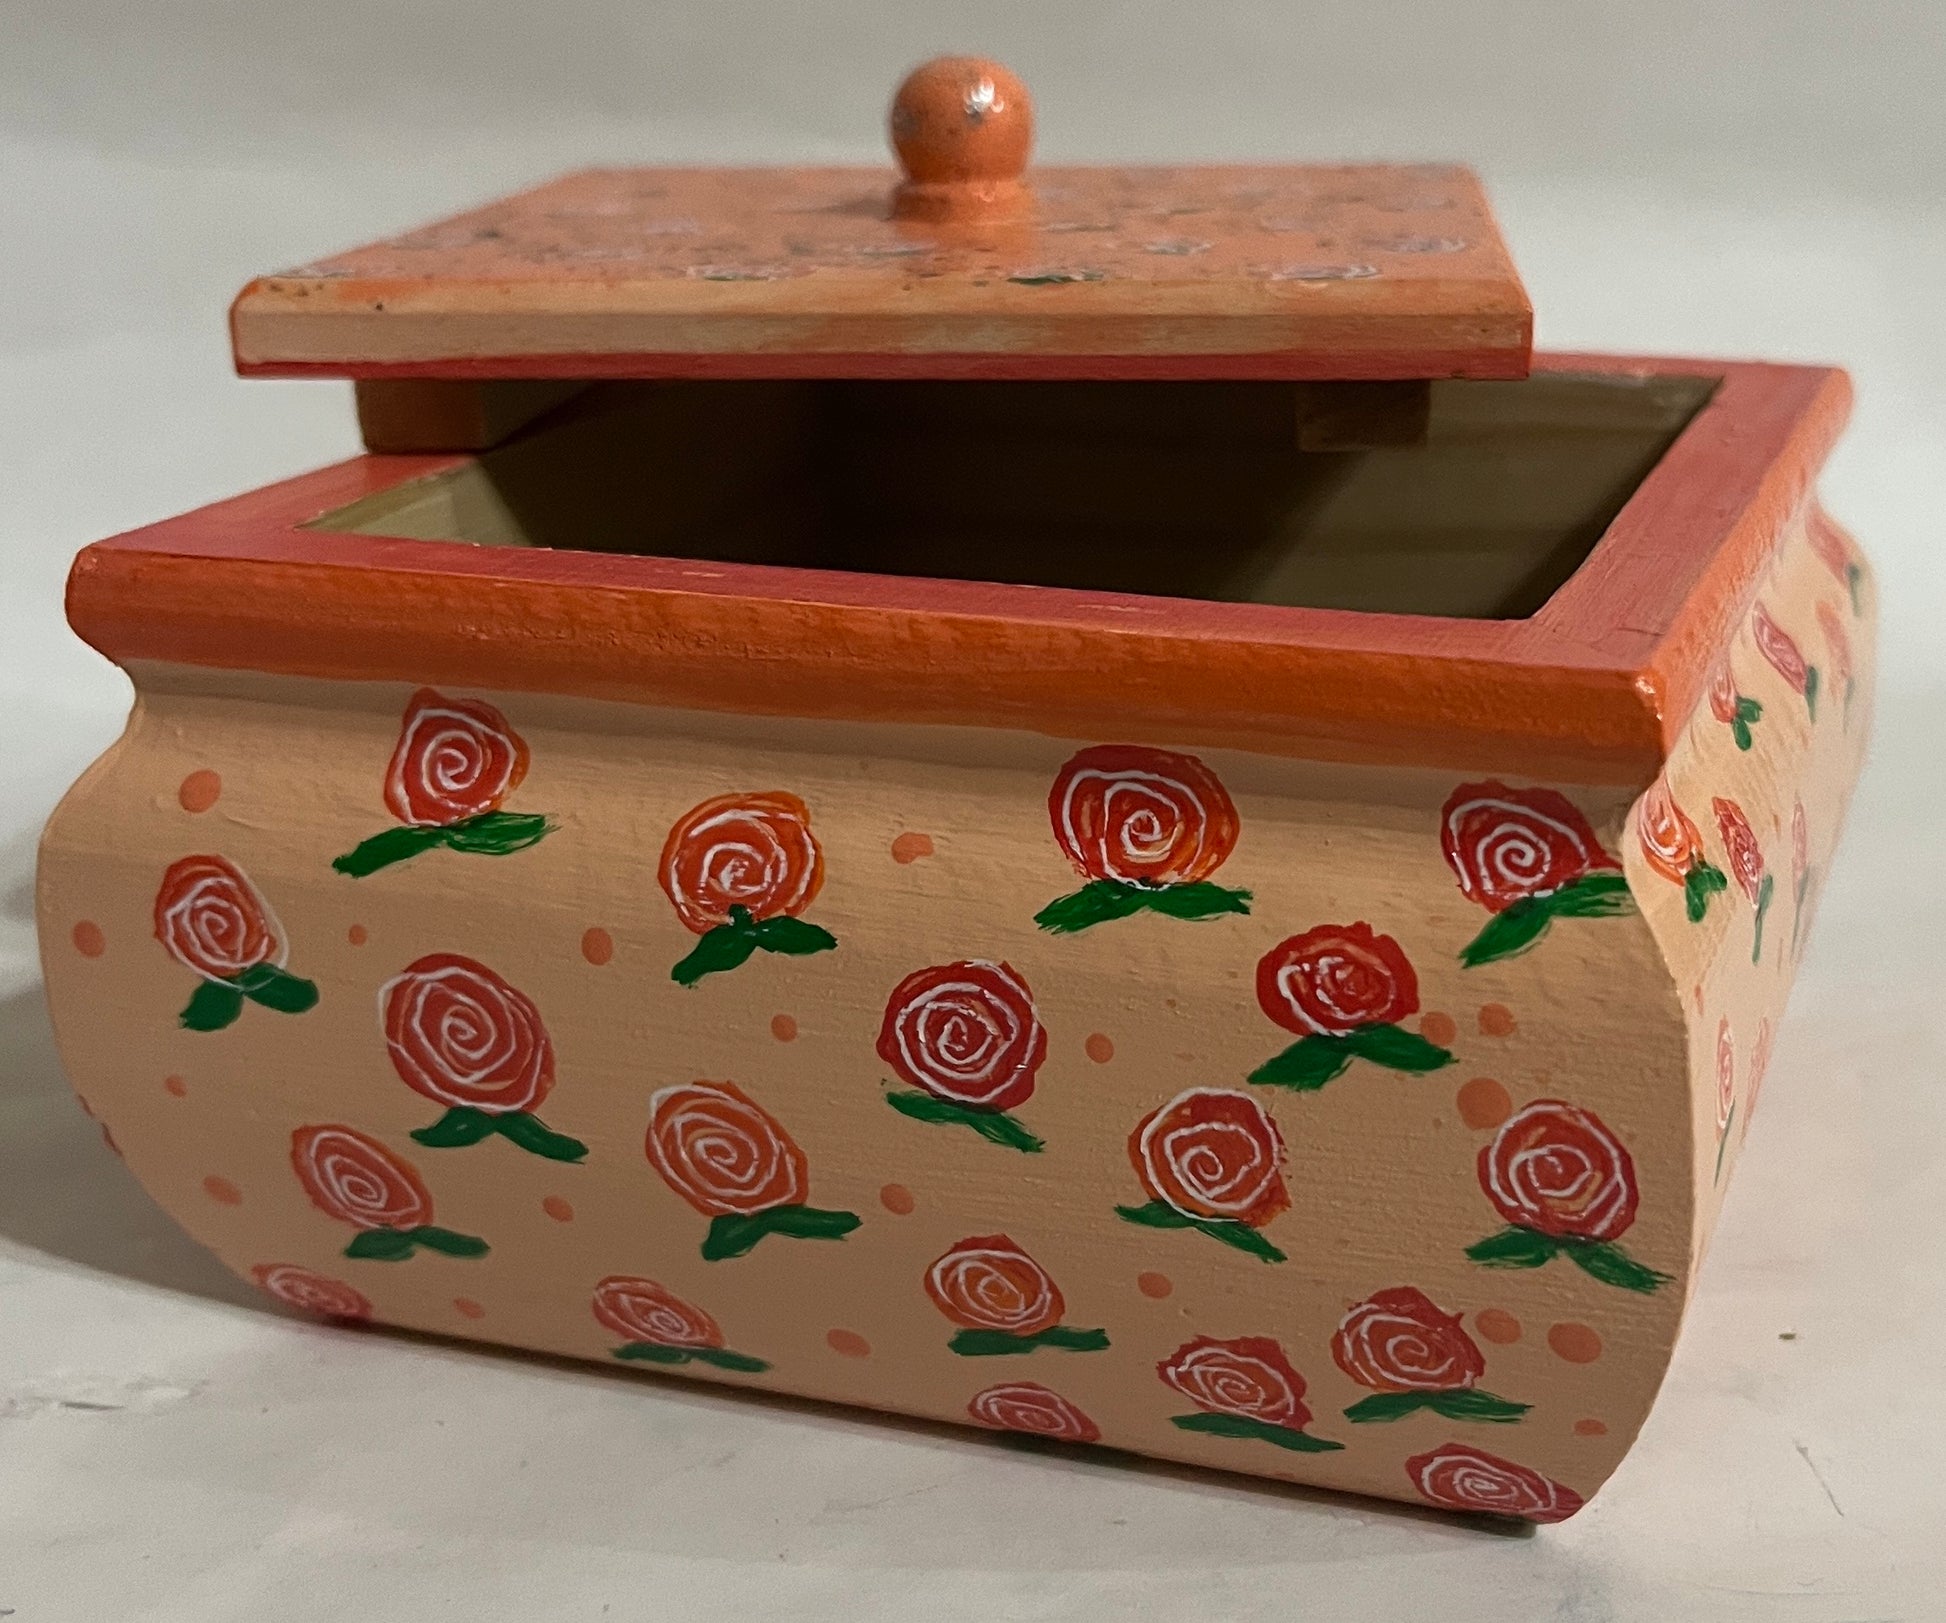 A cute rose box with pretty lid